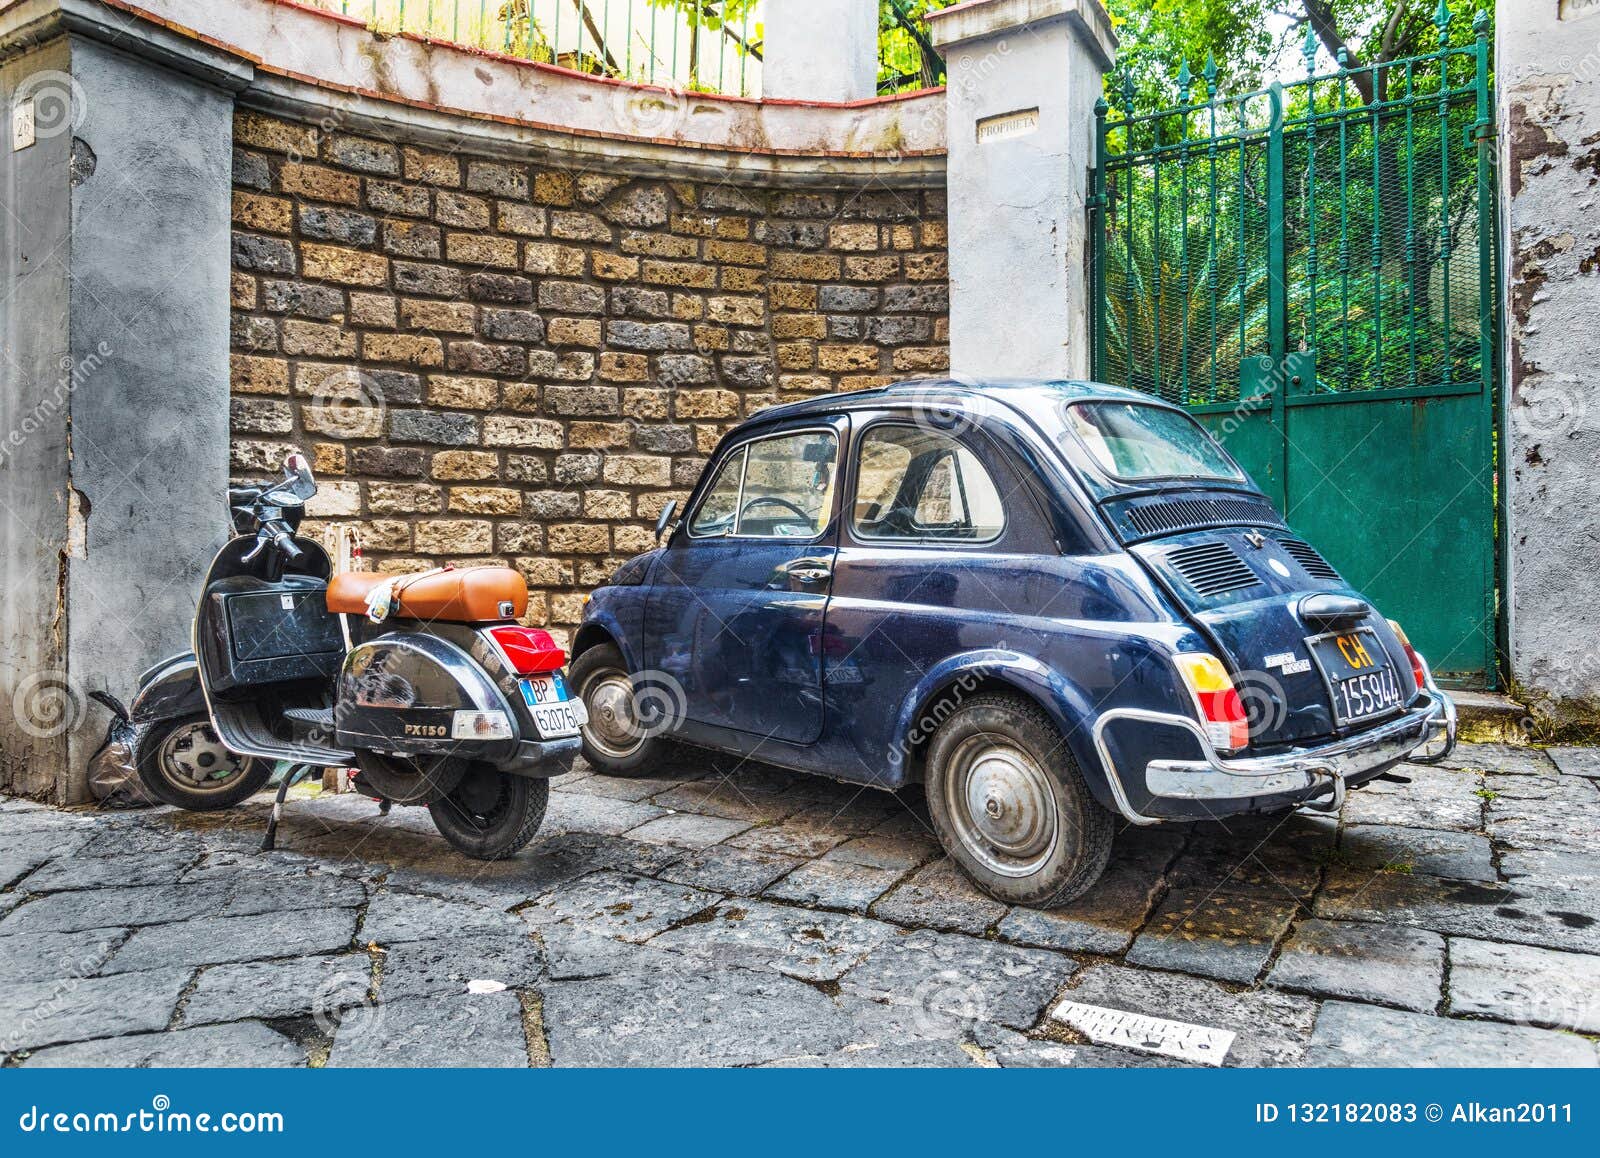 Vintage Vespa and Fiat 500 Parked in a Picturesque Narrow Street Editorial Stock Photo - Image of europe, romantic: 132182083